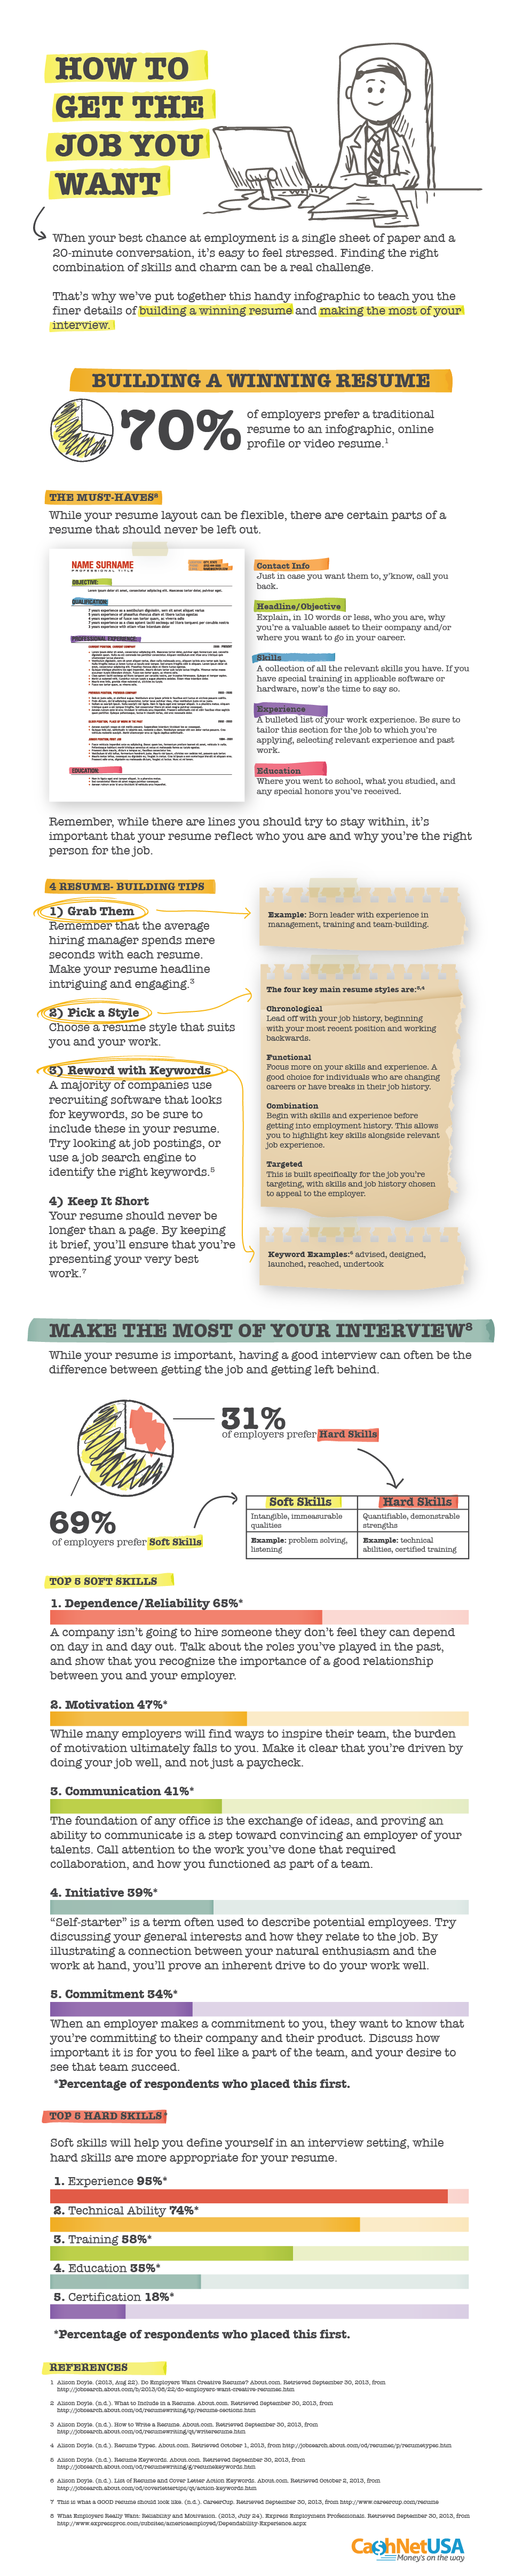 How-to-Get-the-Job-You-Want-Infographic